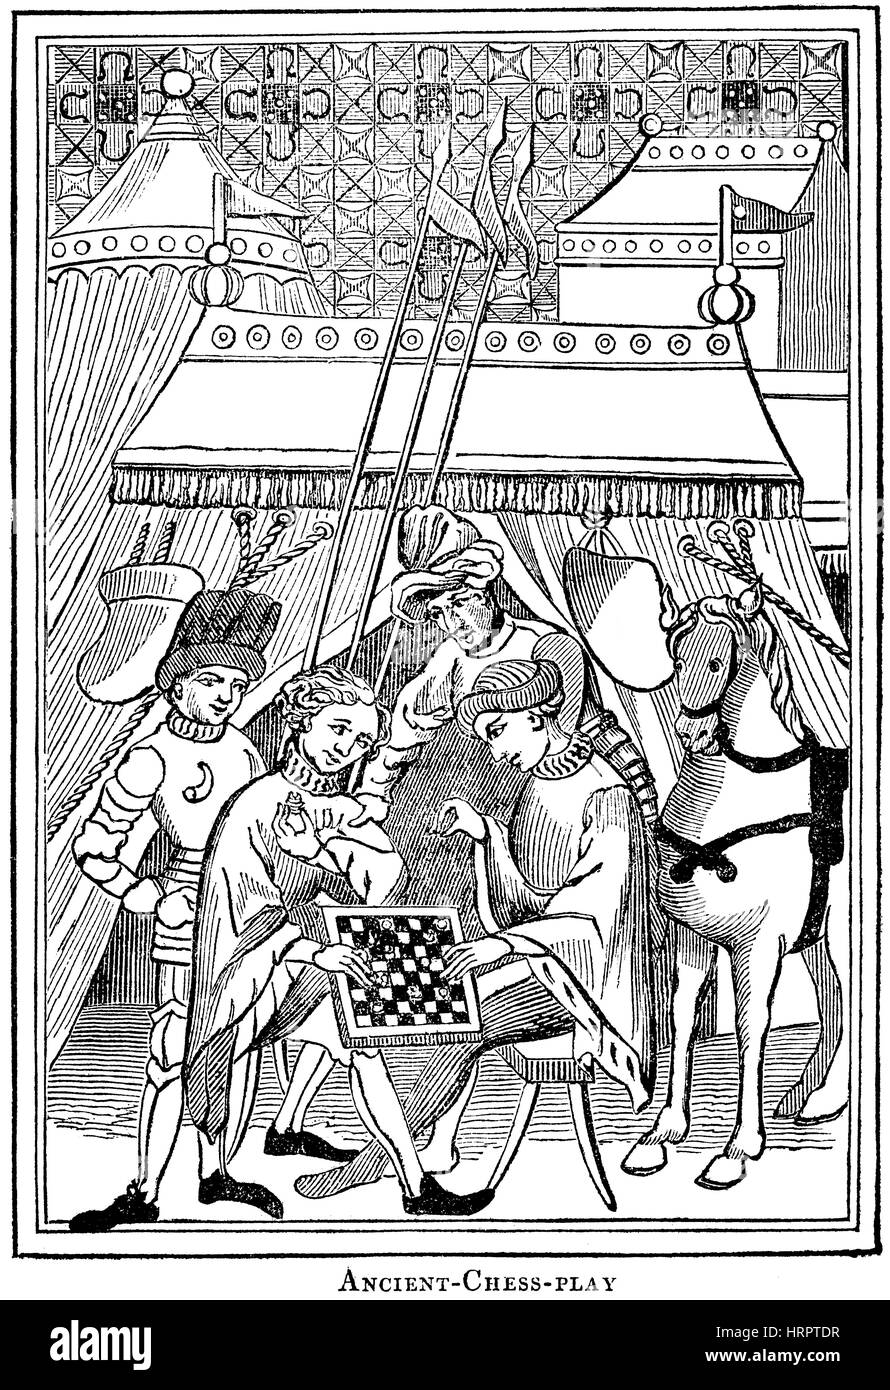 An illustration of a Game of Chess in the 14th Century scanned at high resolution from a book printed in 1831. Believed copyright free. Stock Photo